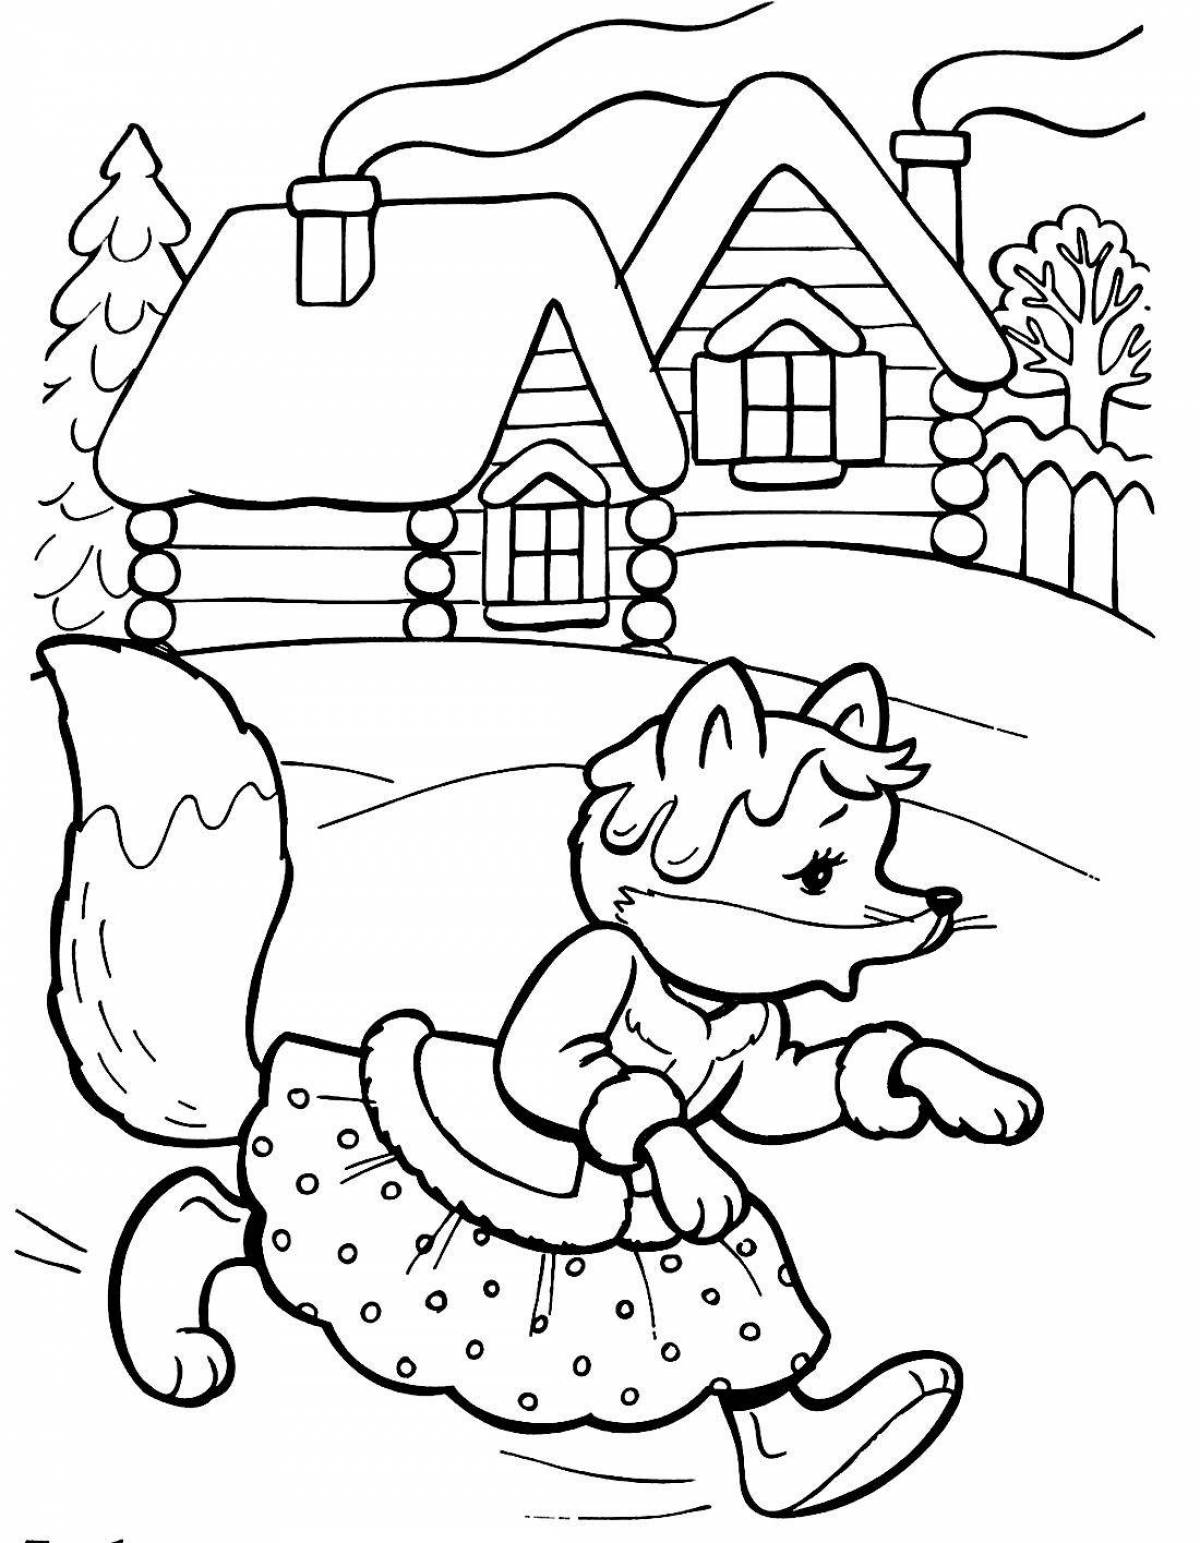 Coloring page dazzling hare's hut